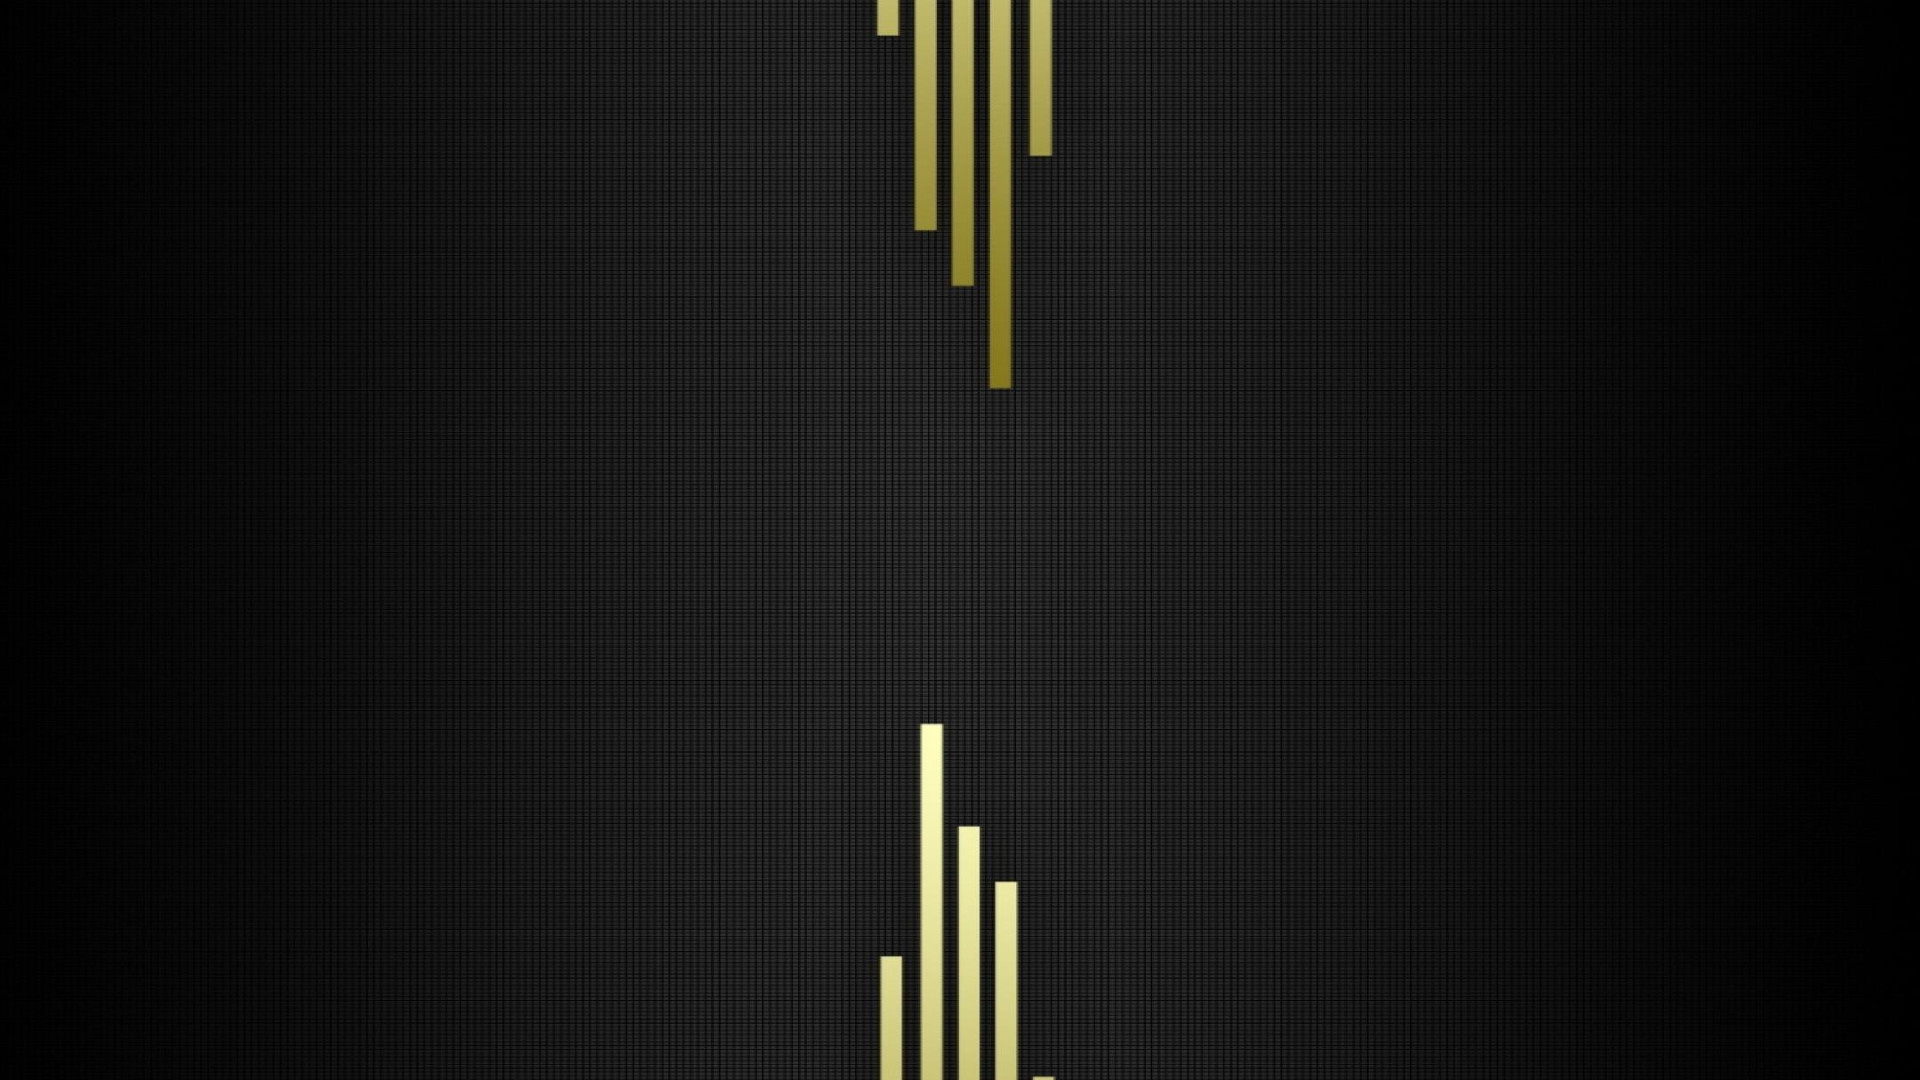 Black and Gold Abstract Wallpaper (57+ images)